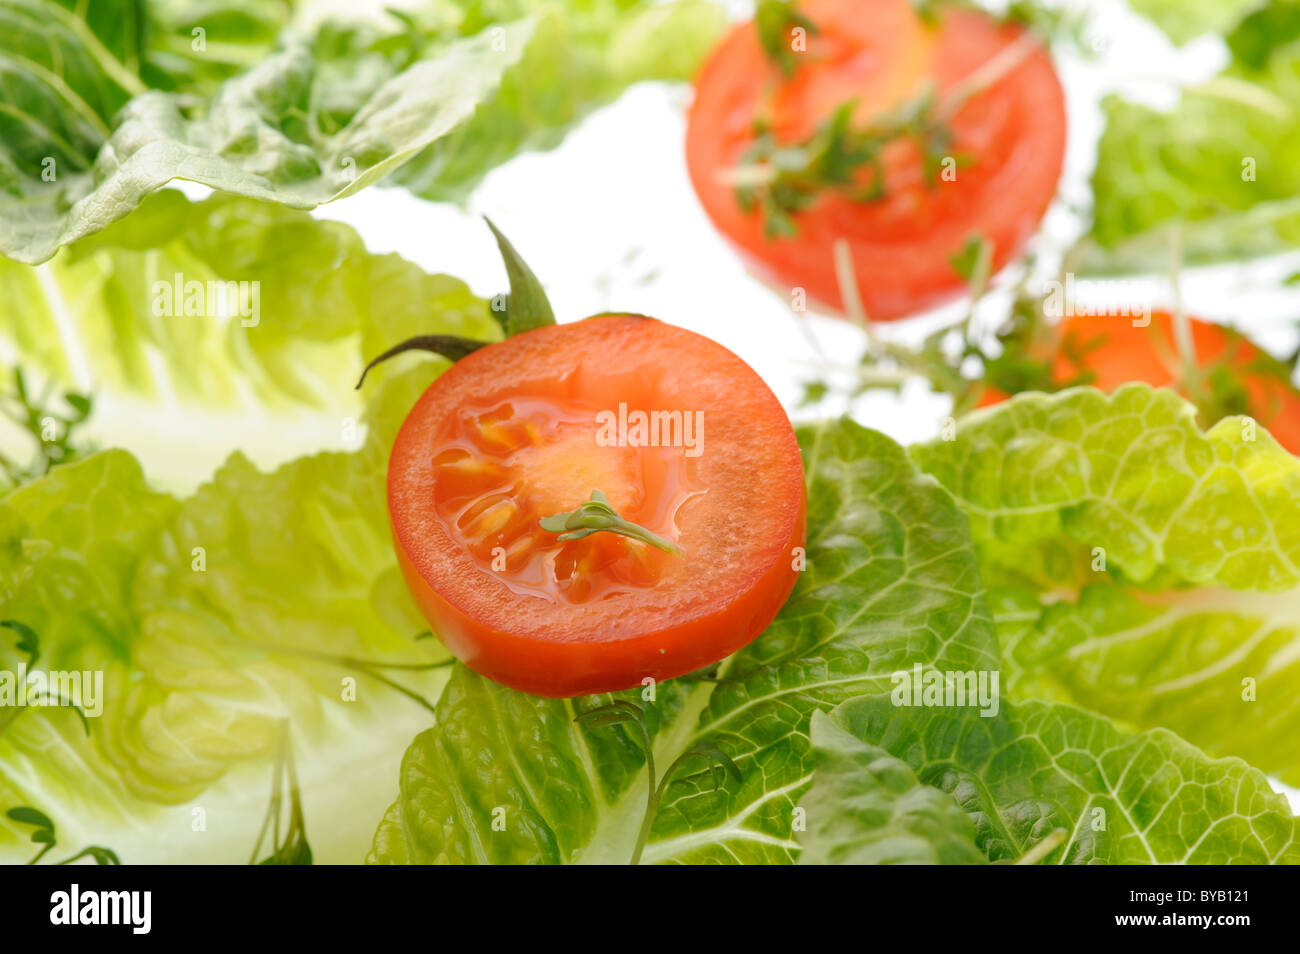 Tomatoes, lettuce and watercress Stock Photo